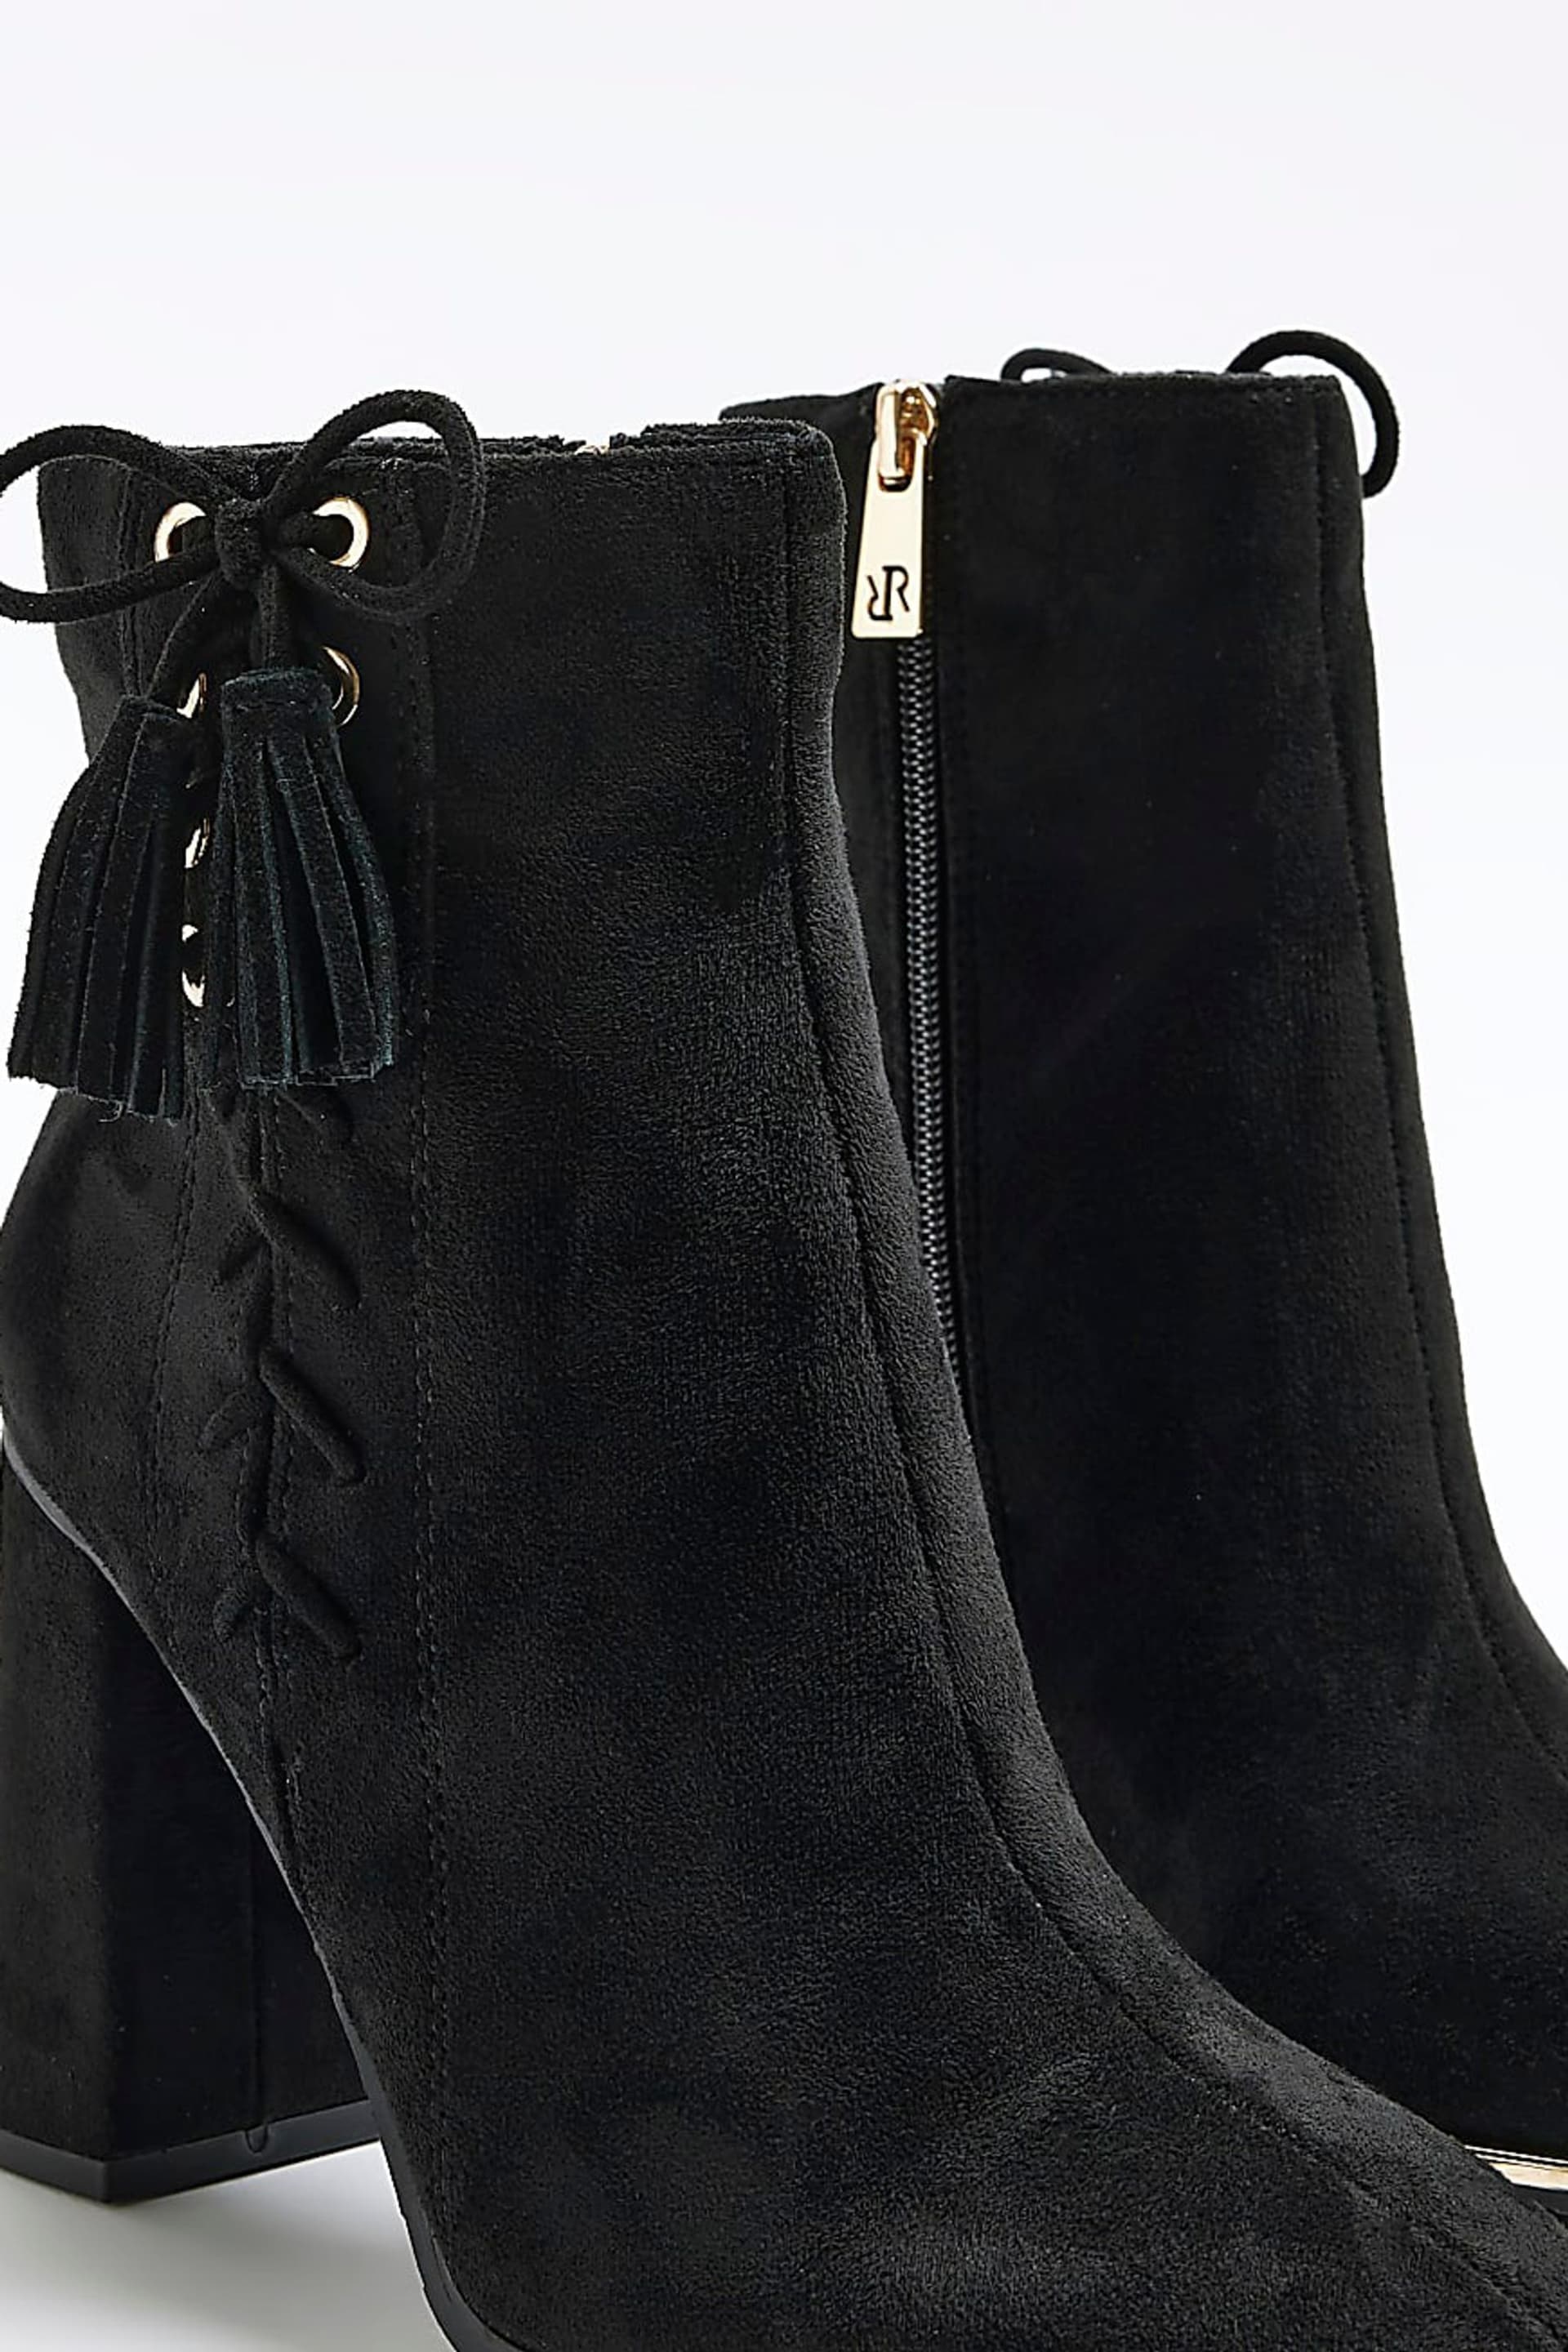 River Island Black Lace Up Corset Boots - Image 5 of 6